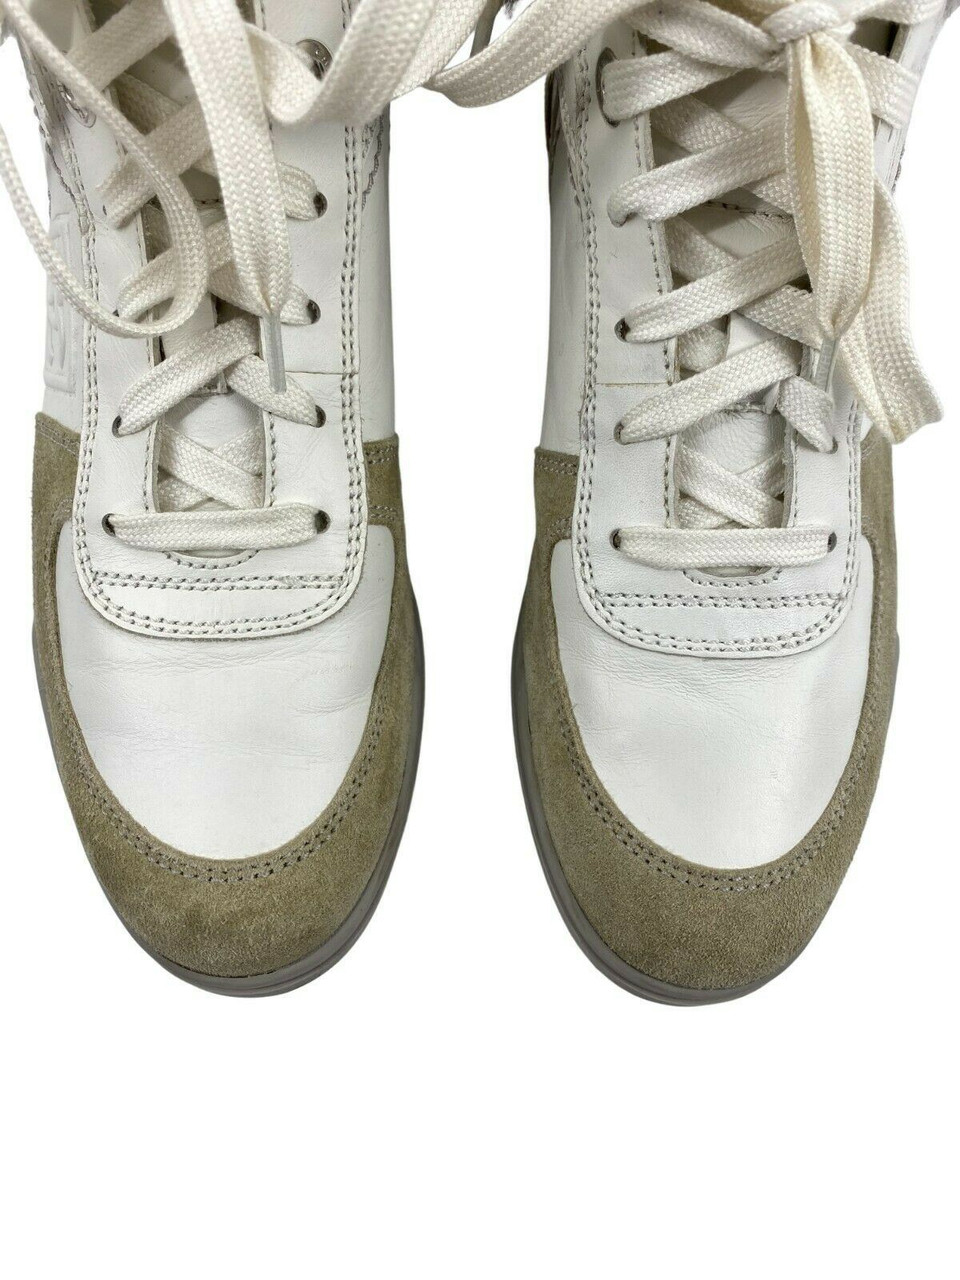 Chanel Leather High Top Sneakers with Chinchilla Fur Trim - Free Shipping  USA